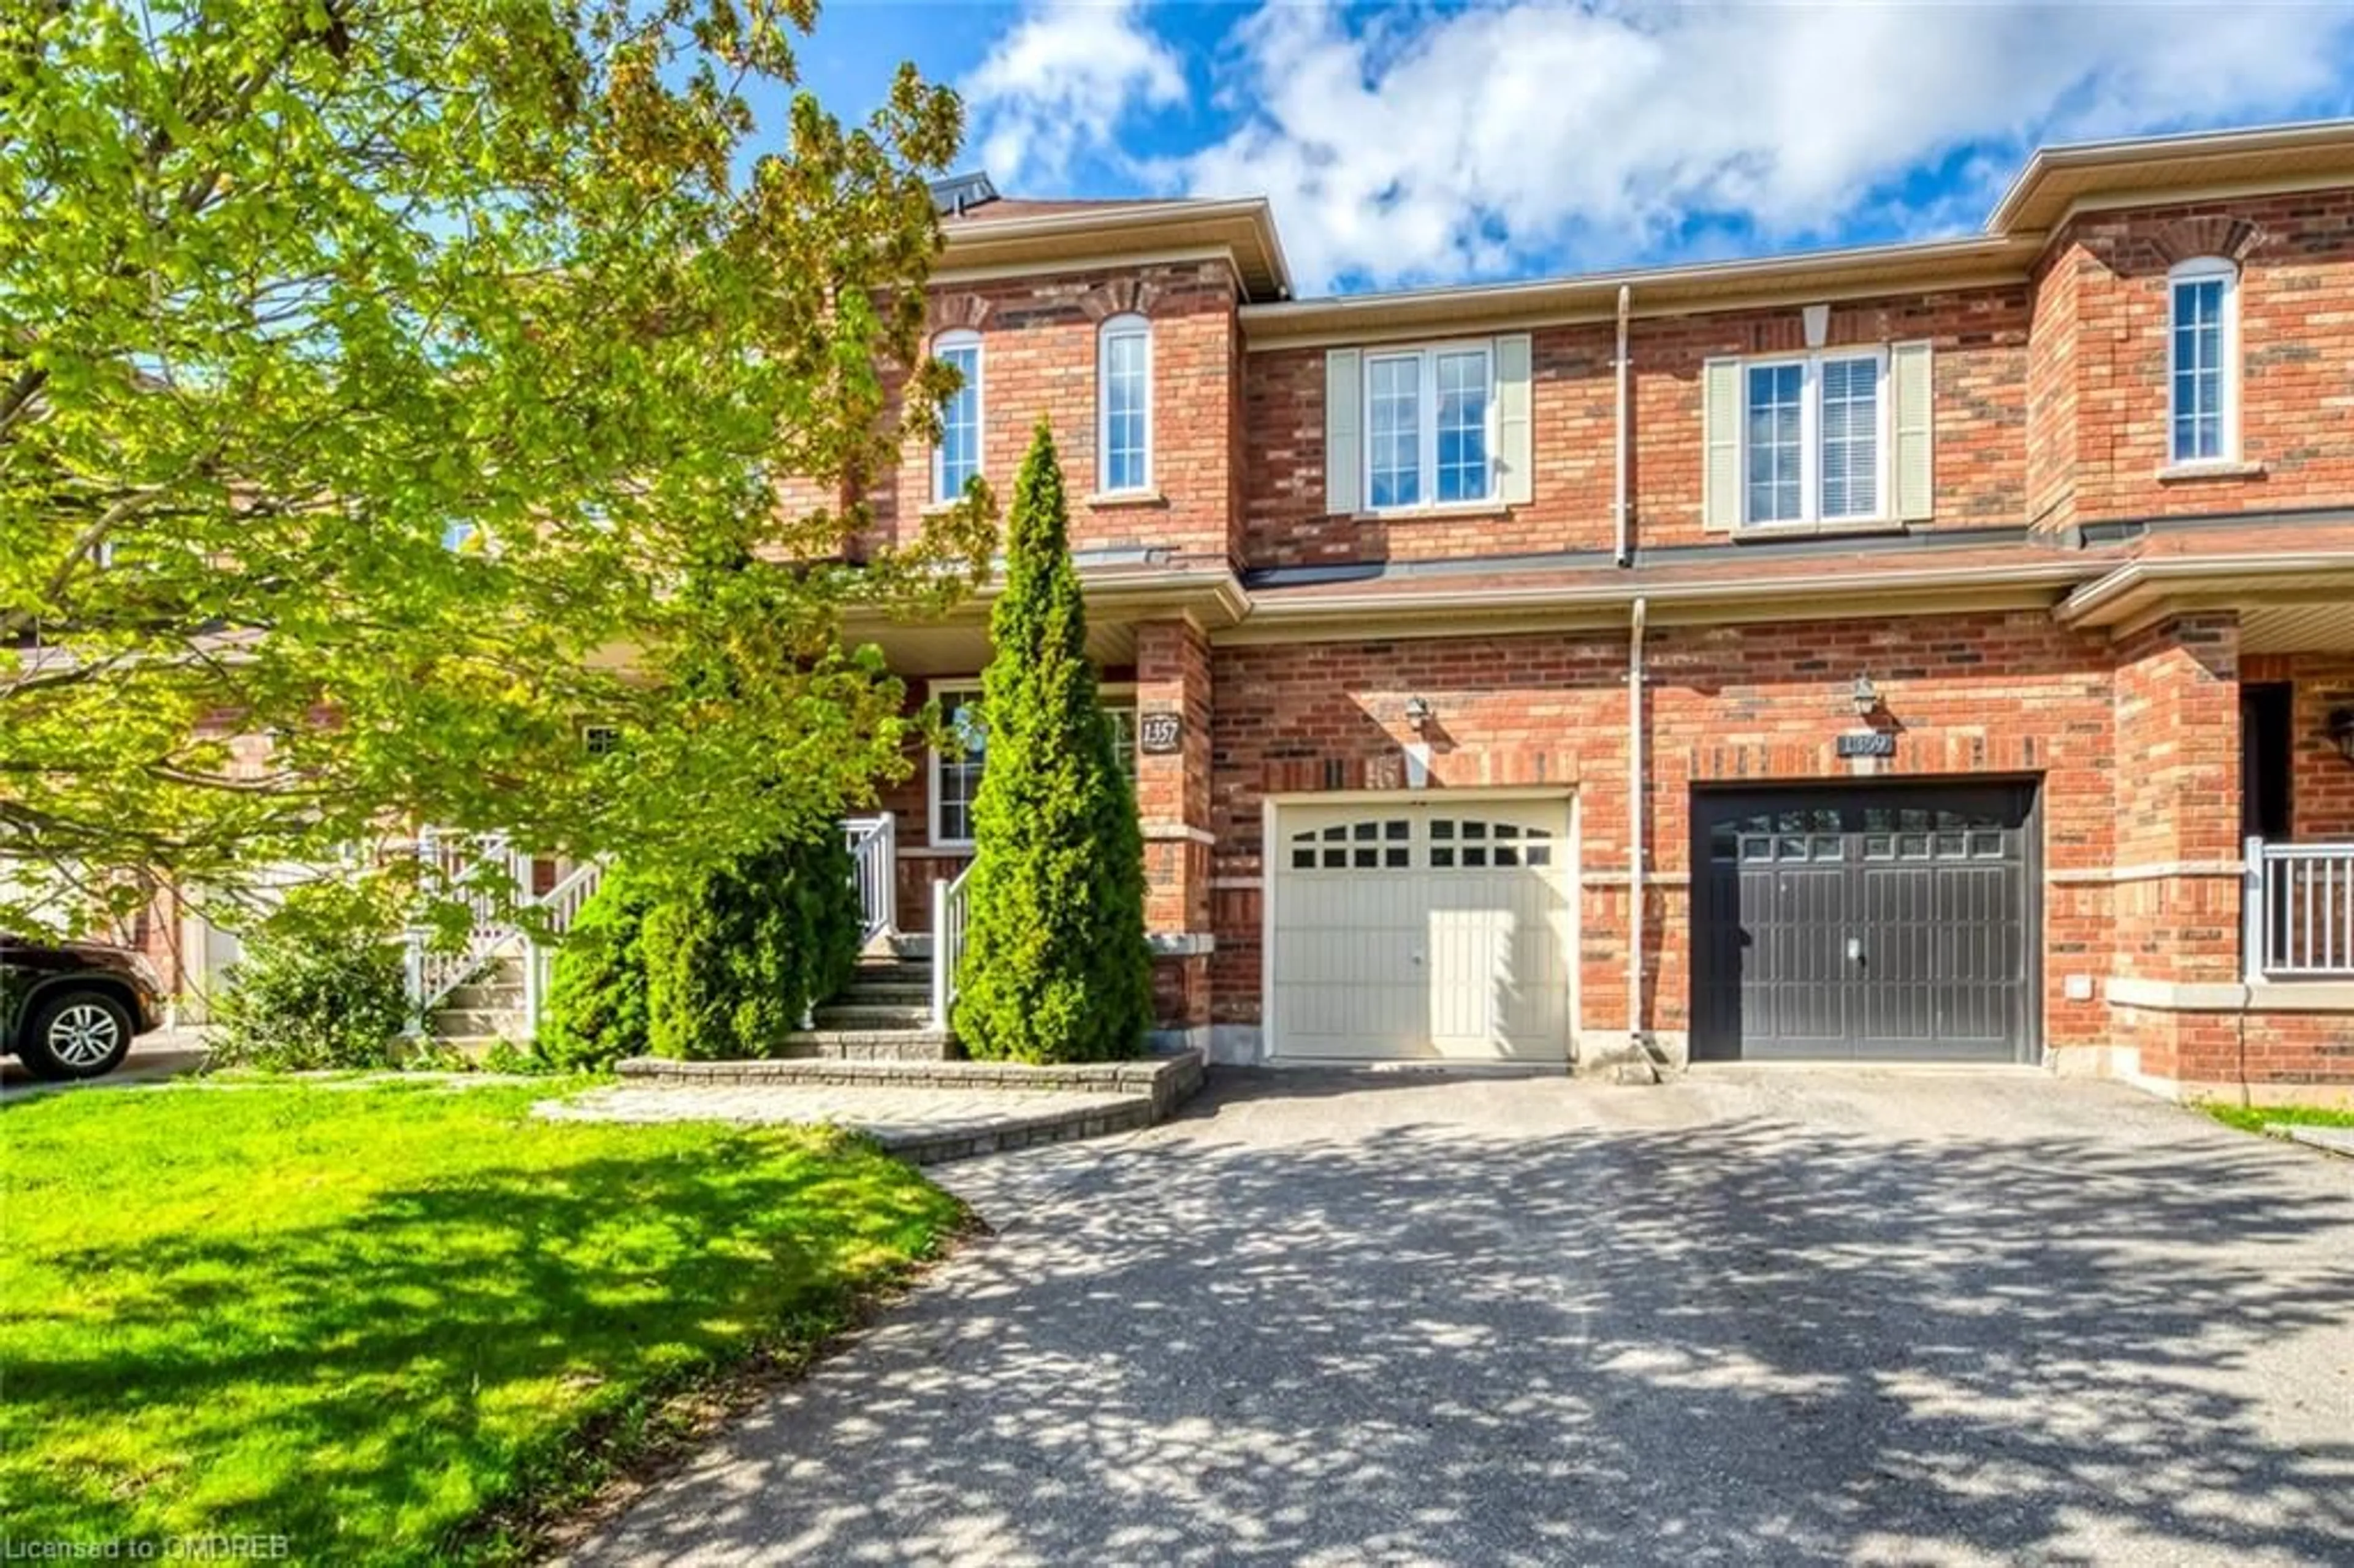 Home with brick exterior material for 1357 Kestell Blvd, Oakville Ontario L6H 0C9